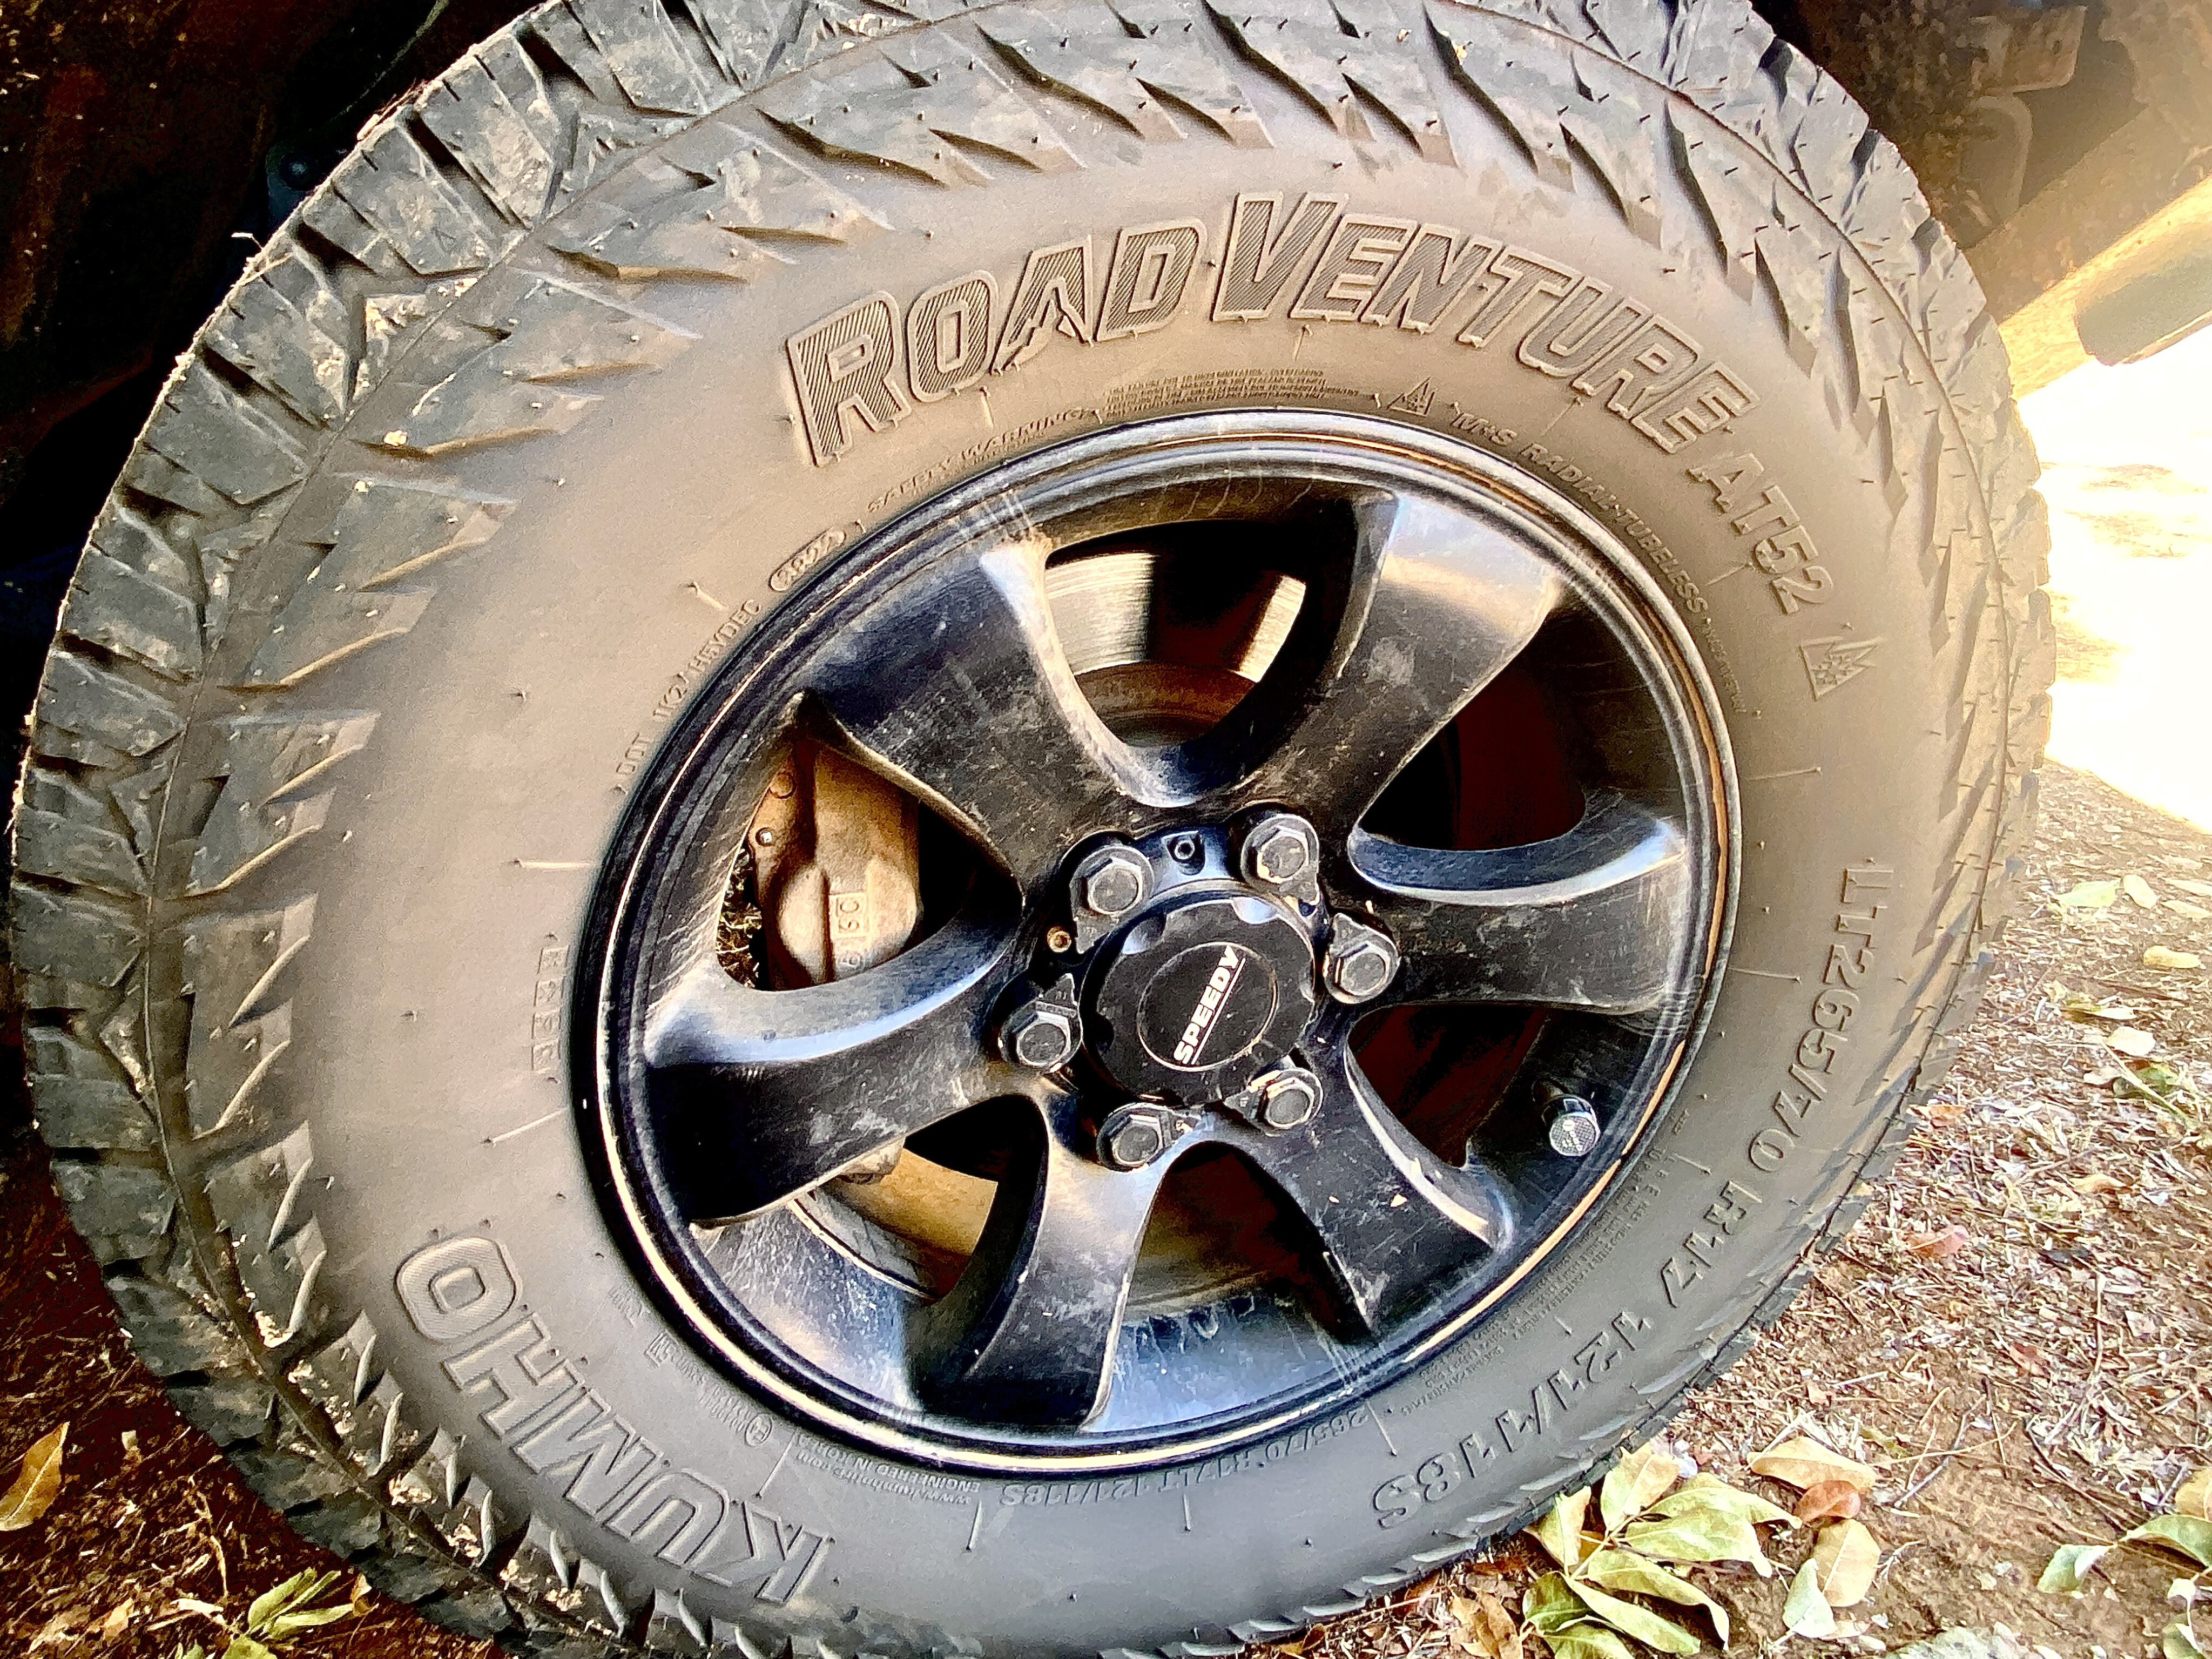 30f93ab5/4x4 australia explore trip planning lt tyres offer a stronger carcass than non lt tyres as should be on your 4wd when you head offroad jpg